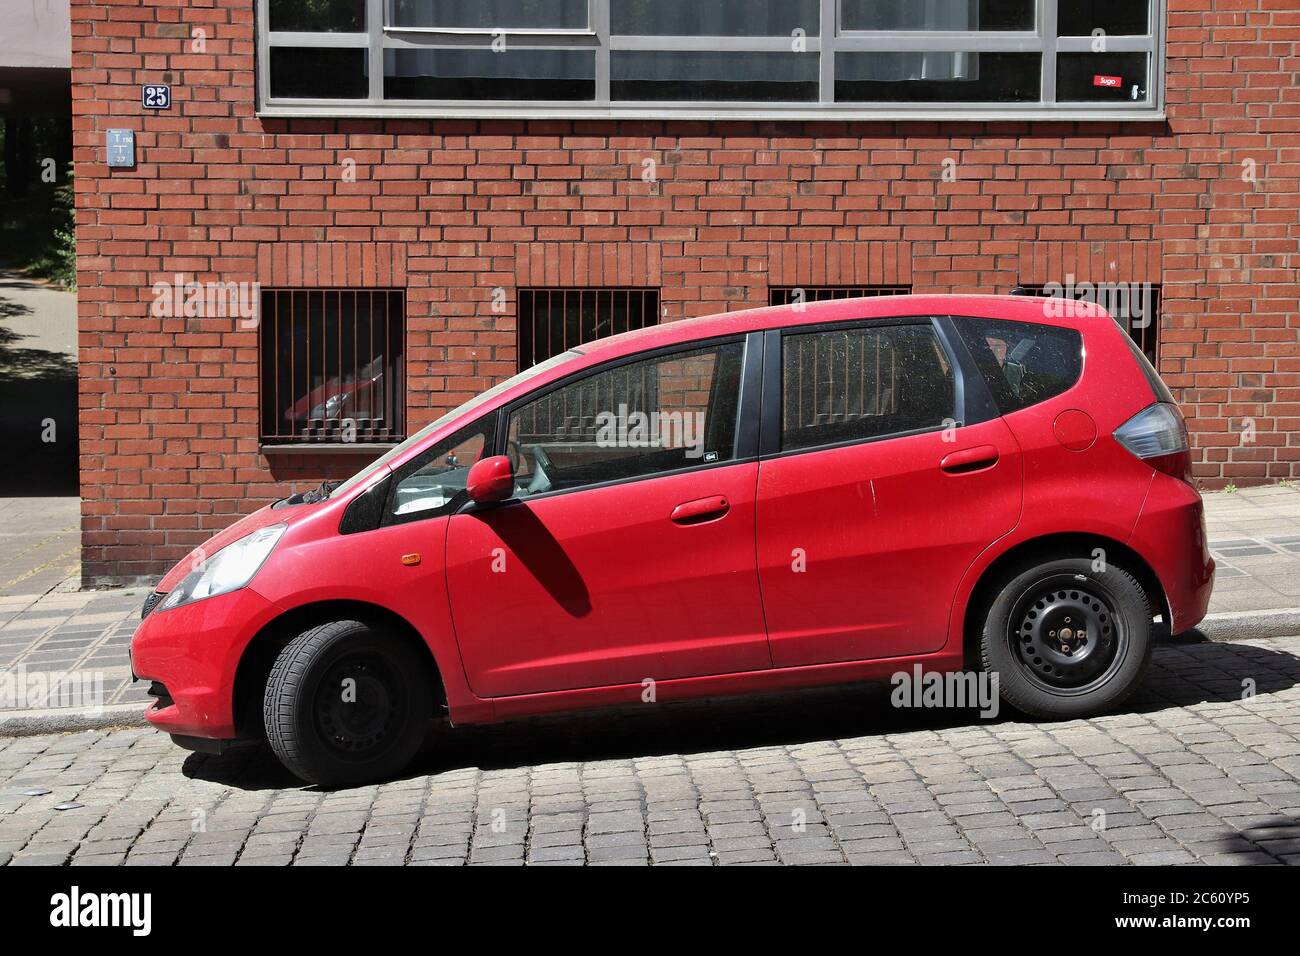 NUREMBERG, GERMANY - MAY 7, 2018: Red Honda Jazz compact car parked in Germany. There were 45.8 million cars registered in Germany (as of 2017). Stock Photo